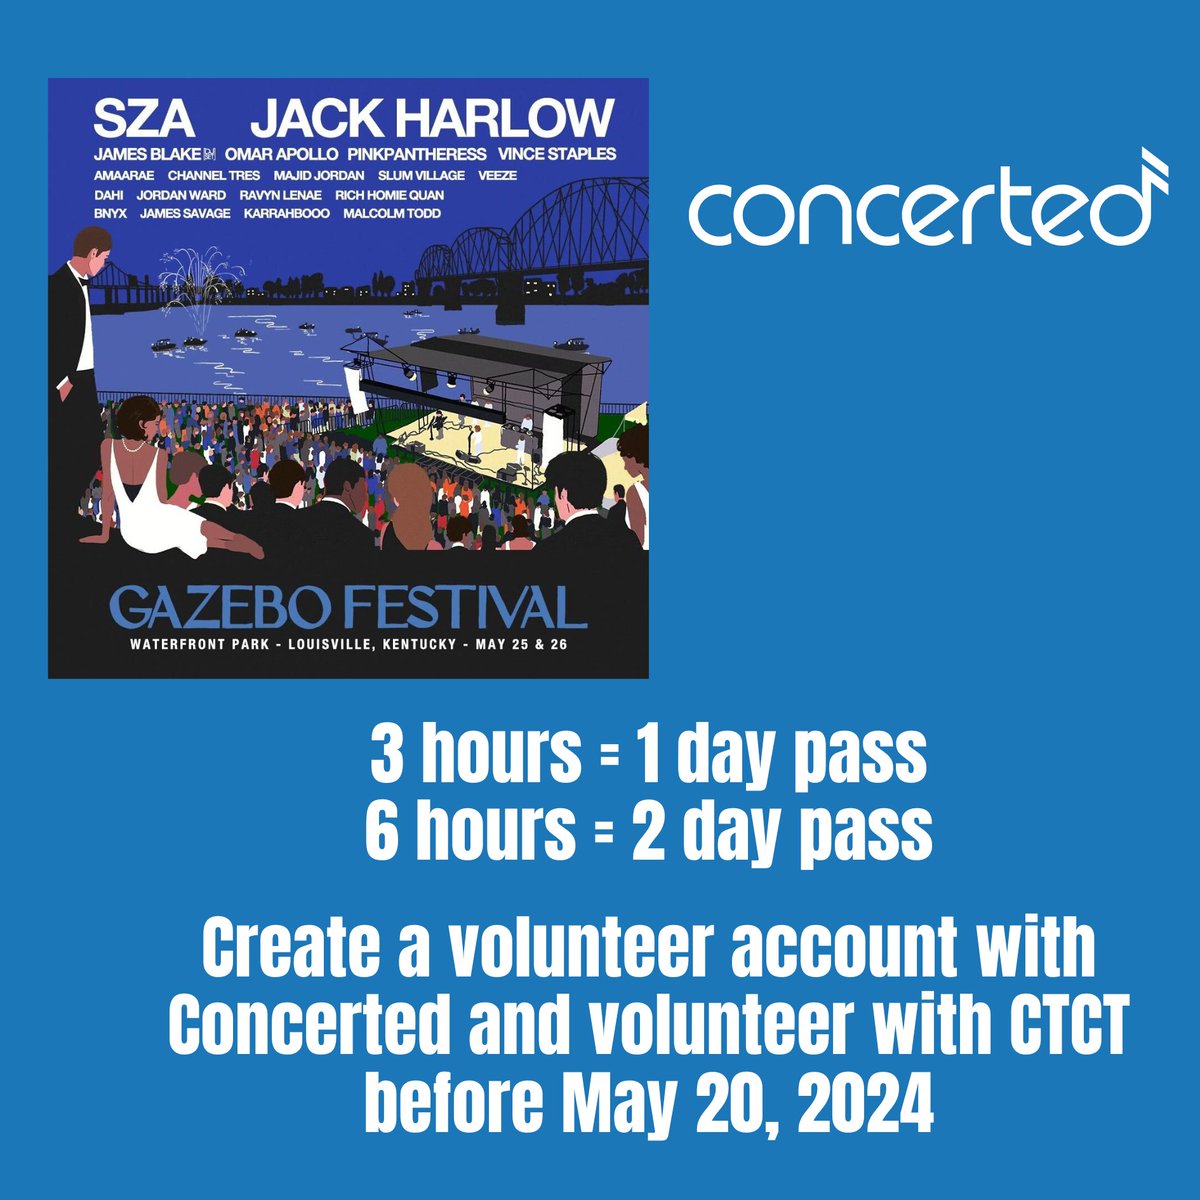 Don't forget! Sign up to volunteer with CTCT at concertedusa.org and earn concert tickets while making a difference! 🎵 You can even get tickets to Gazebo Festival!